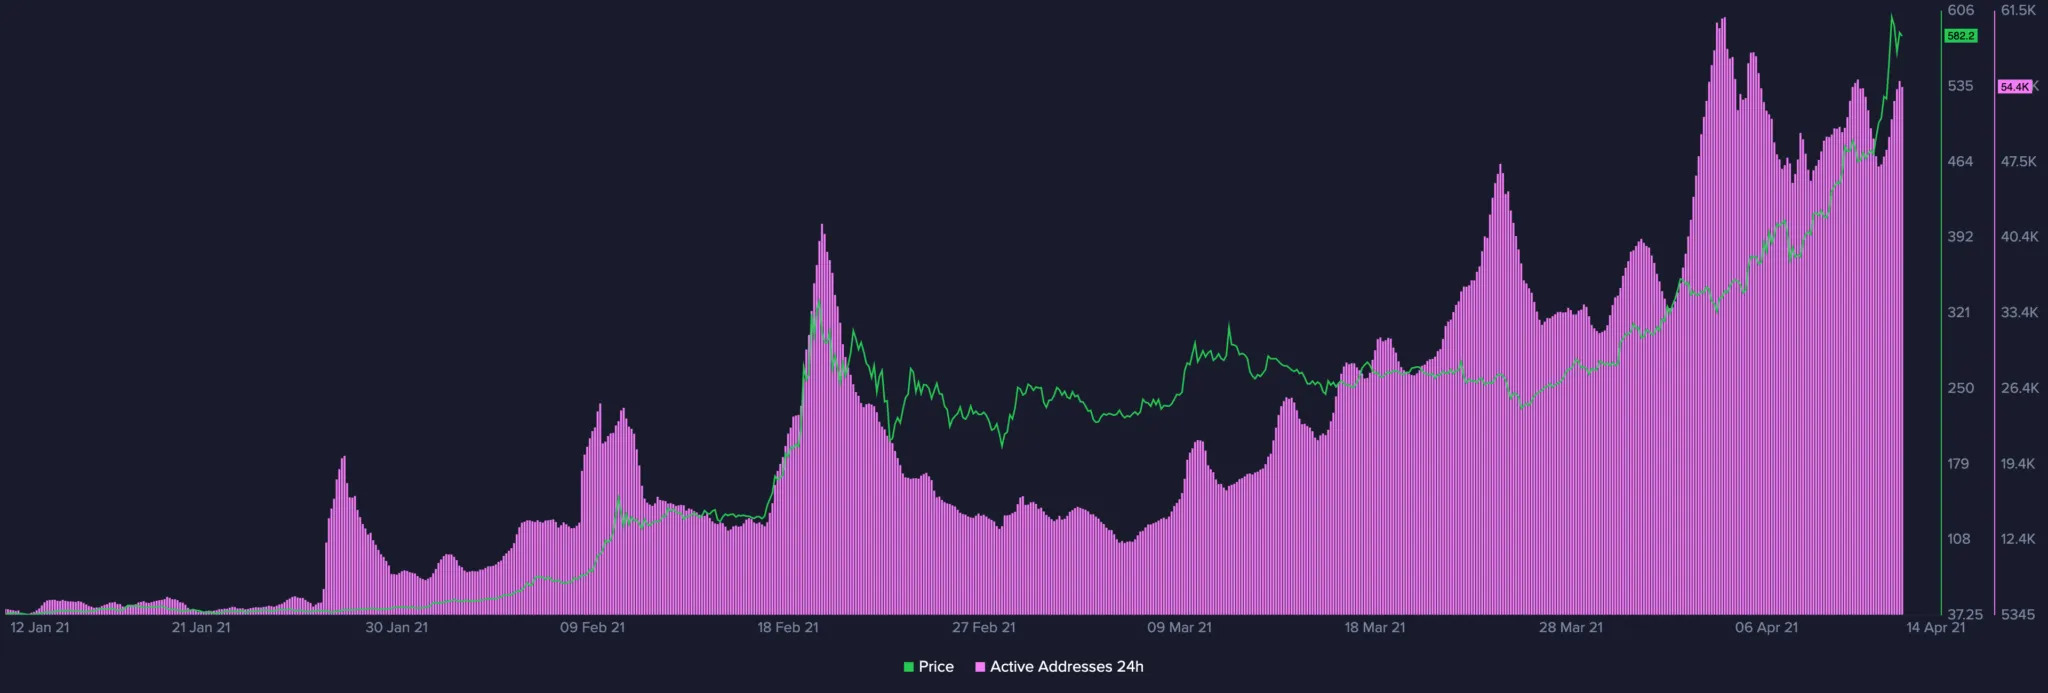 Binance Сoin price has grown by 1700% since the beginning of the year